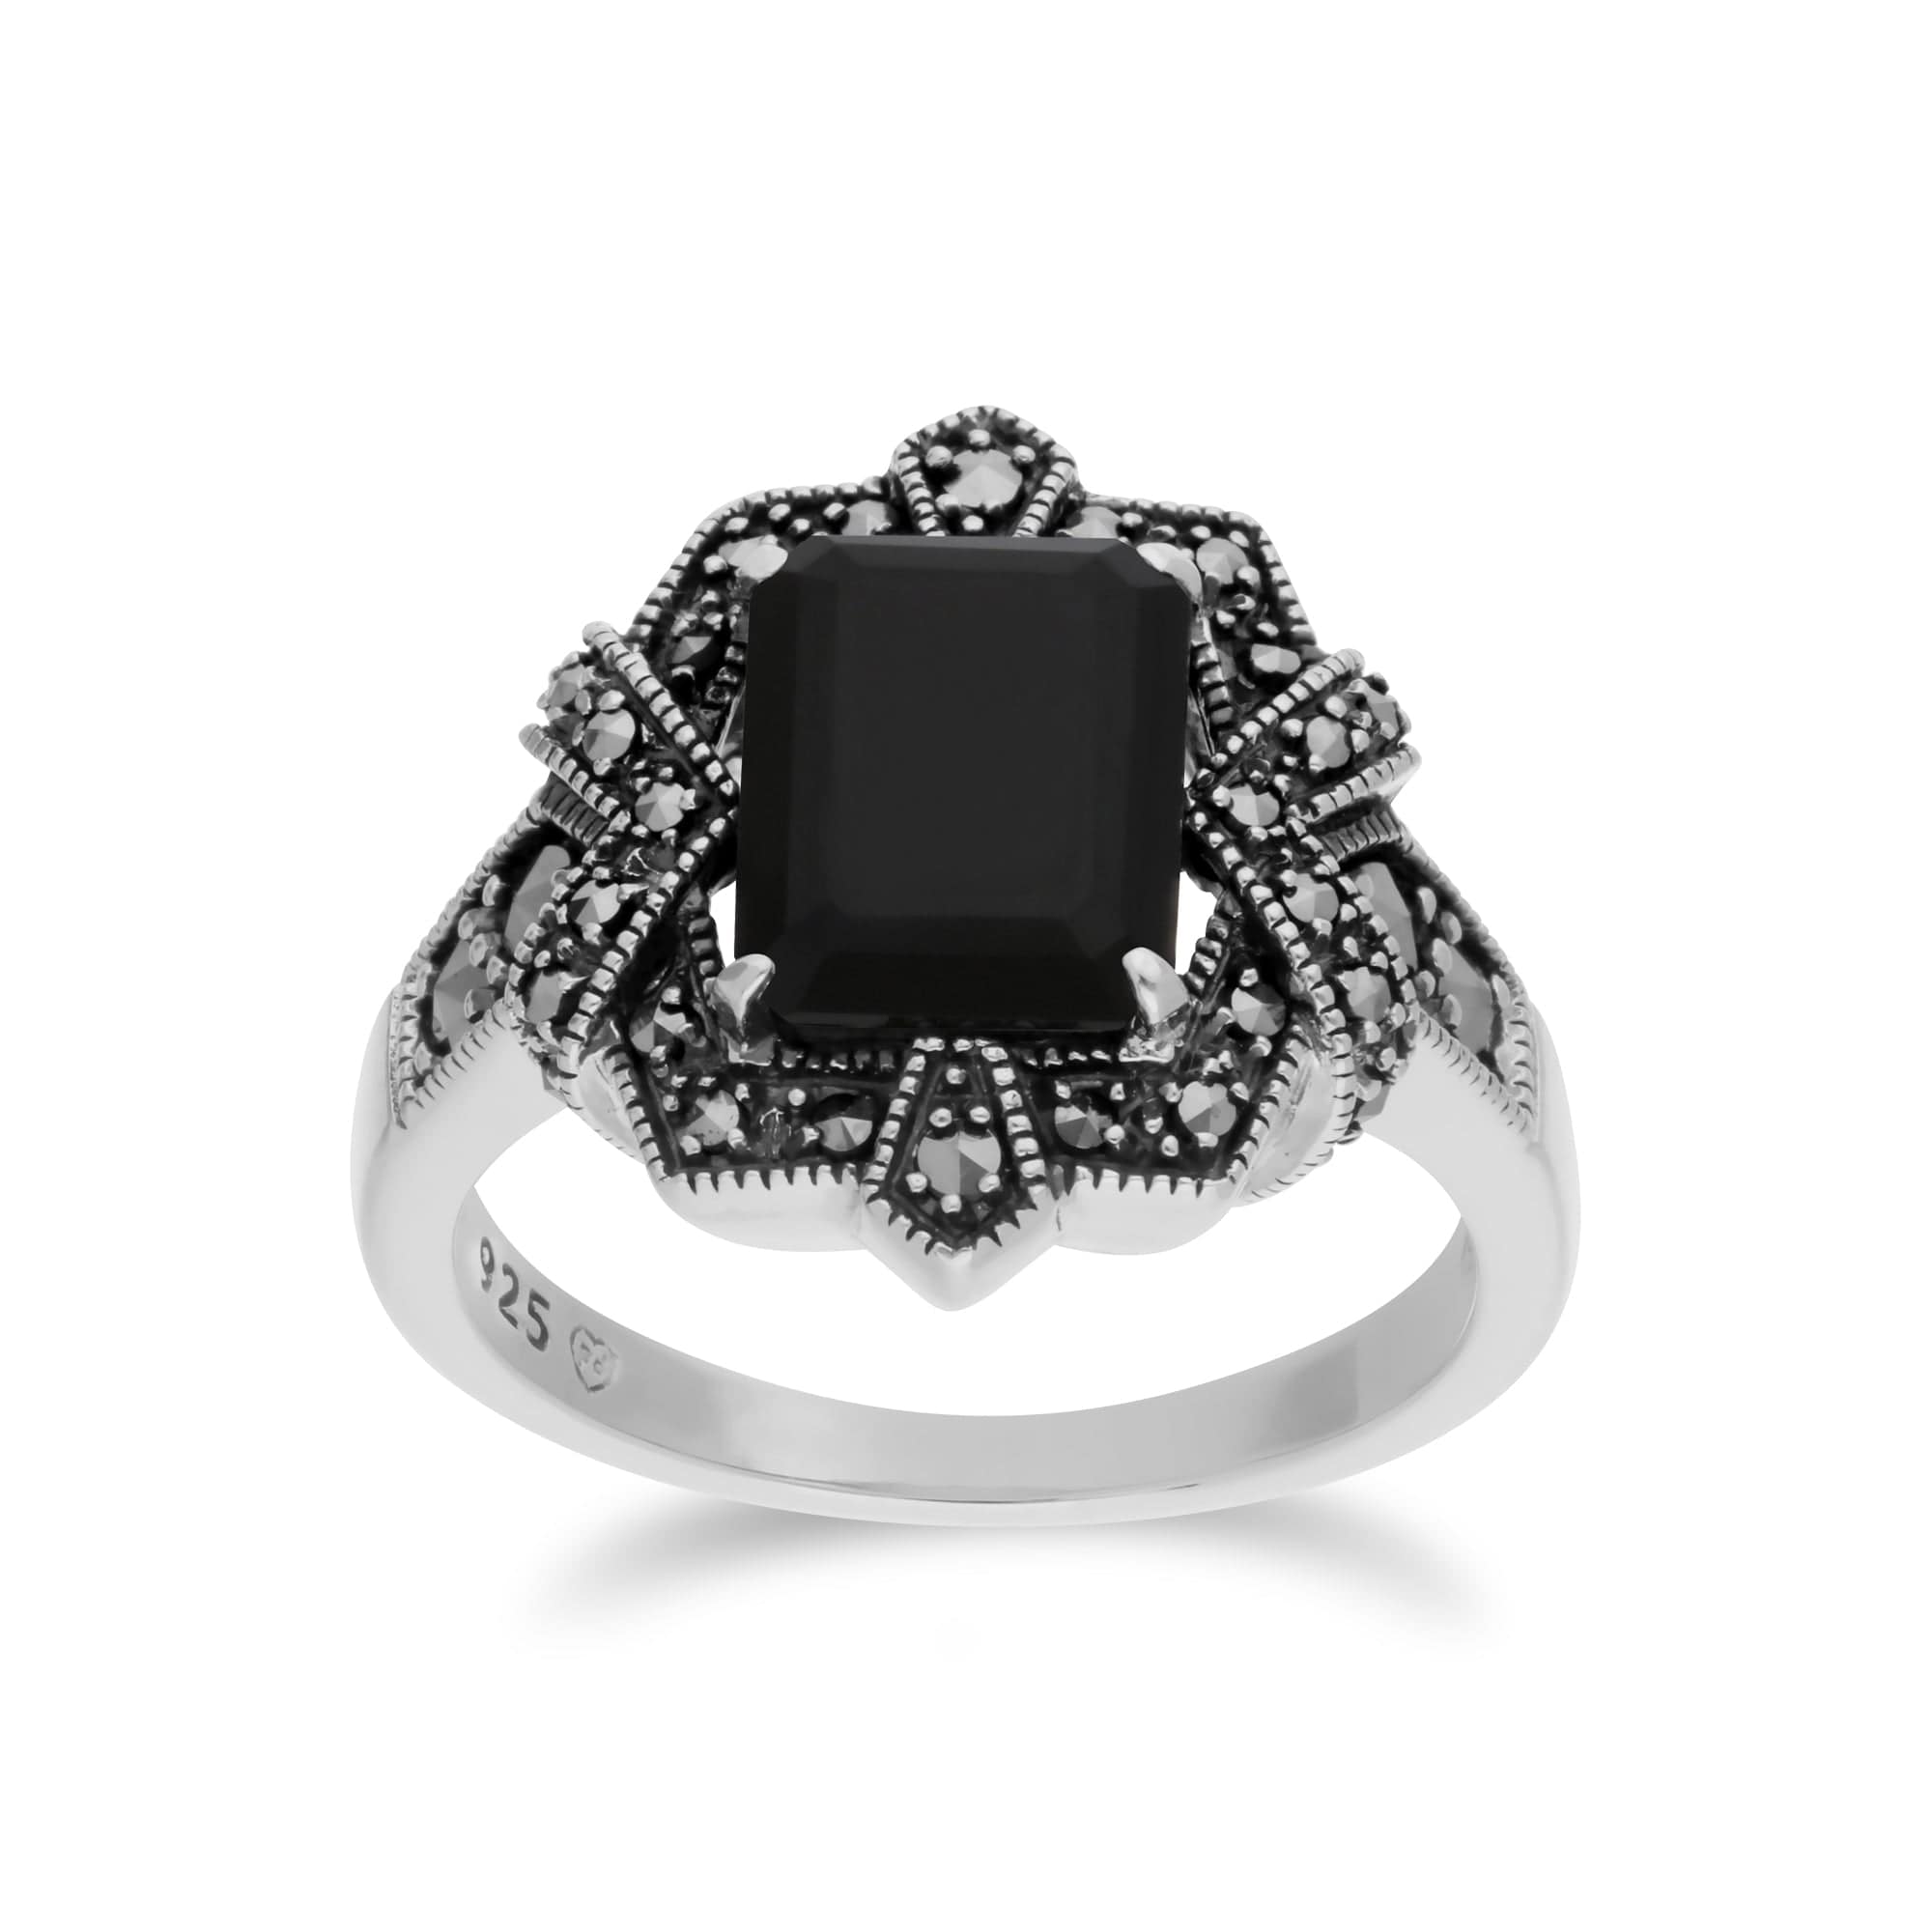 214R570807925 Art Deco Style Baguette Black Onyx & Marcasite Ring in 925 Sterling Silver 1